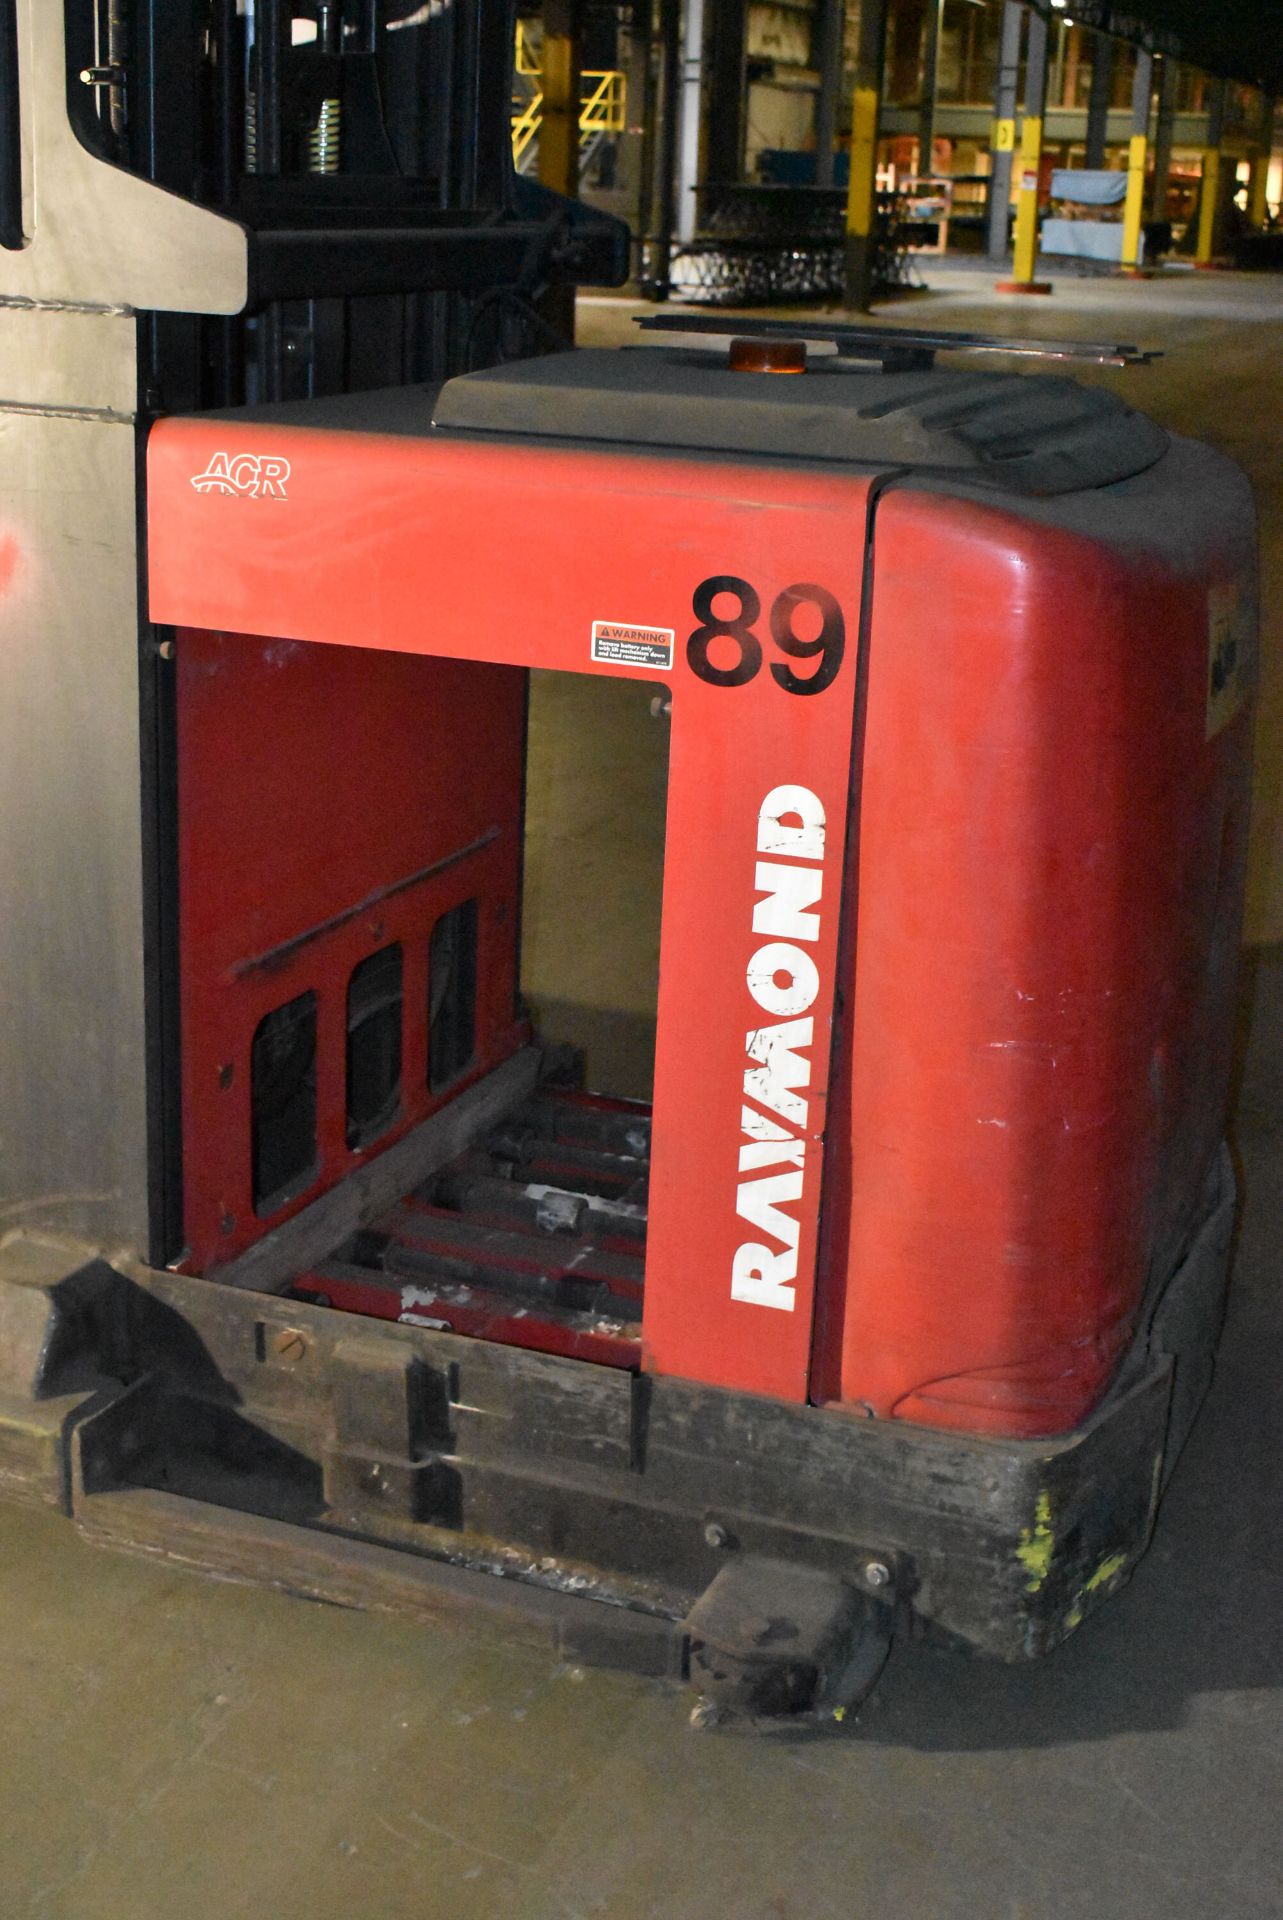 RAYMOND (2016) 560-OPC30TT 1,700 LB. CAPACITY 36V ELECTRIC ORDER PICKER WITH 330" MAX. LIFT - Image 7 of 9